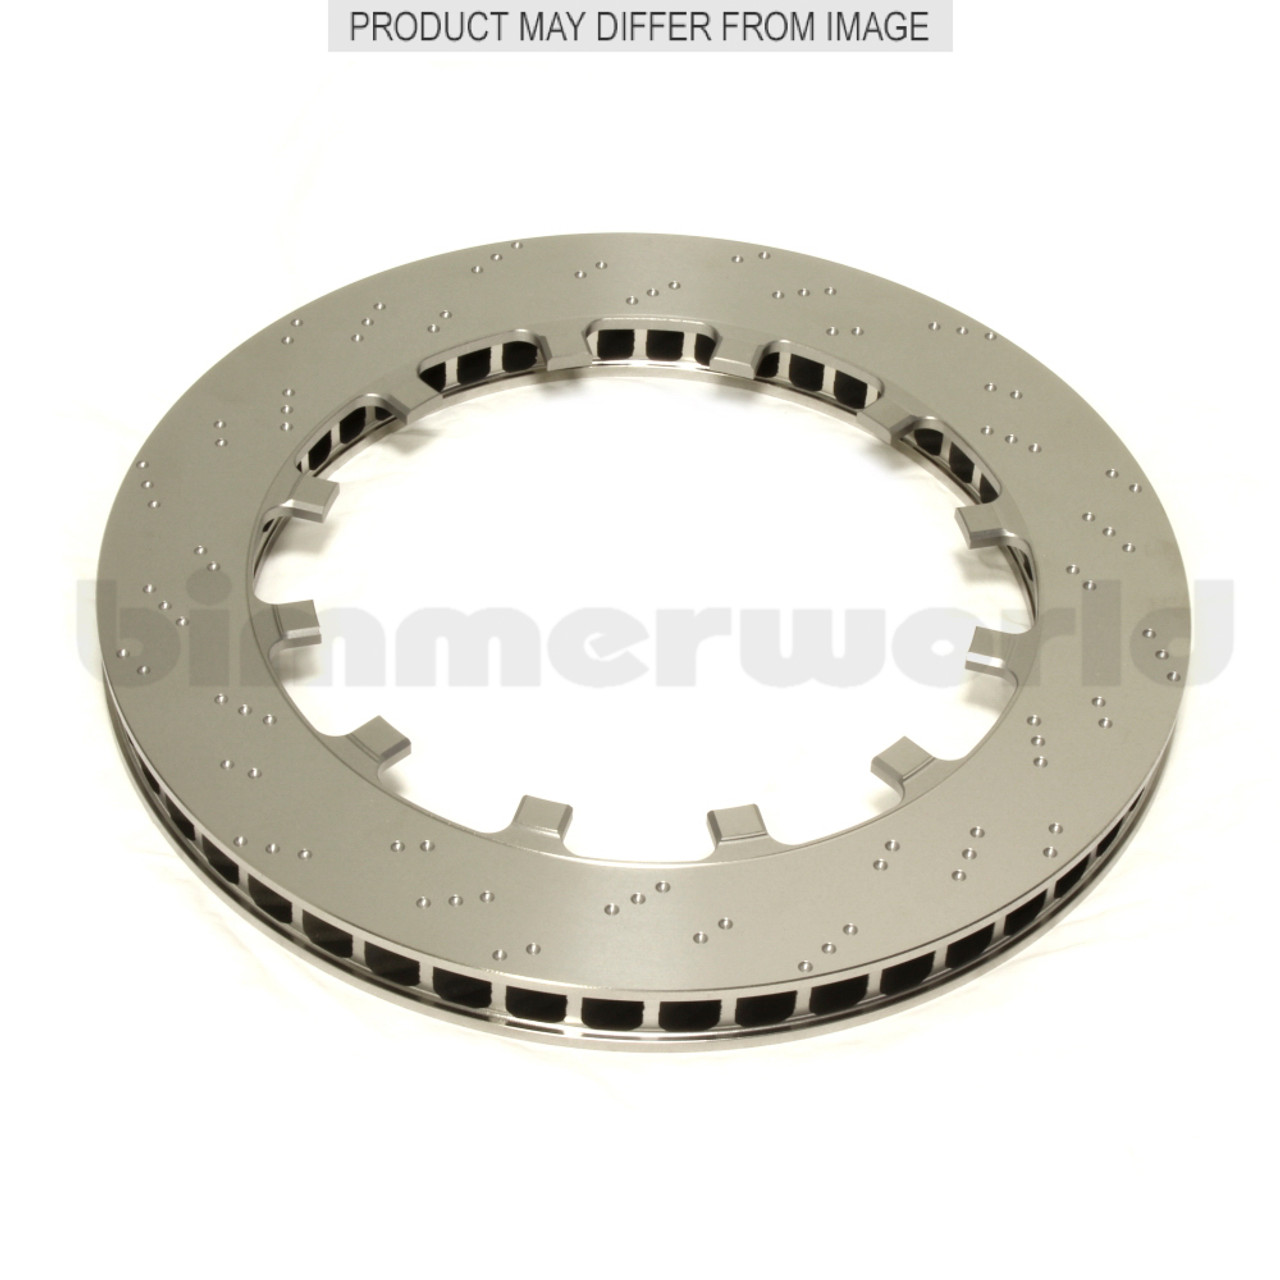 PFC Replacement V2 Disc/Ring - 371mm Dimpled